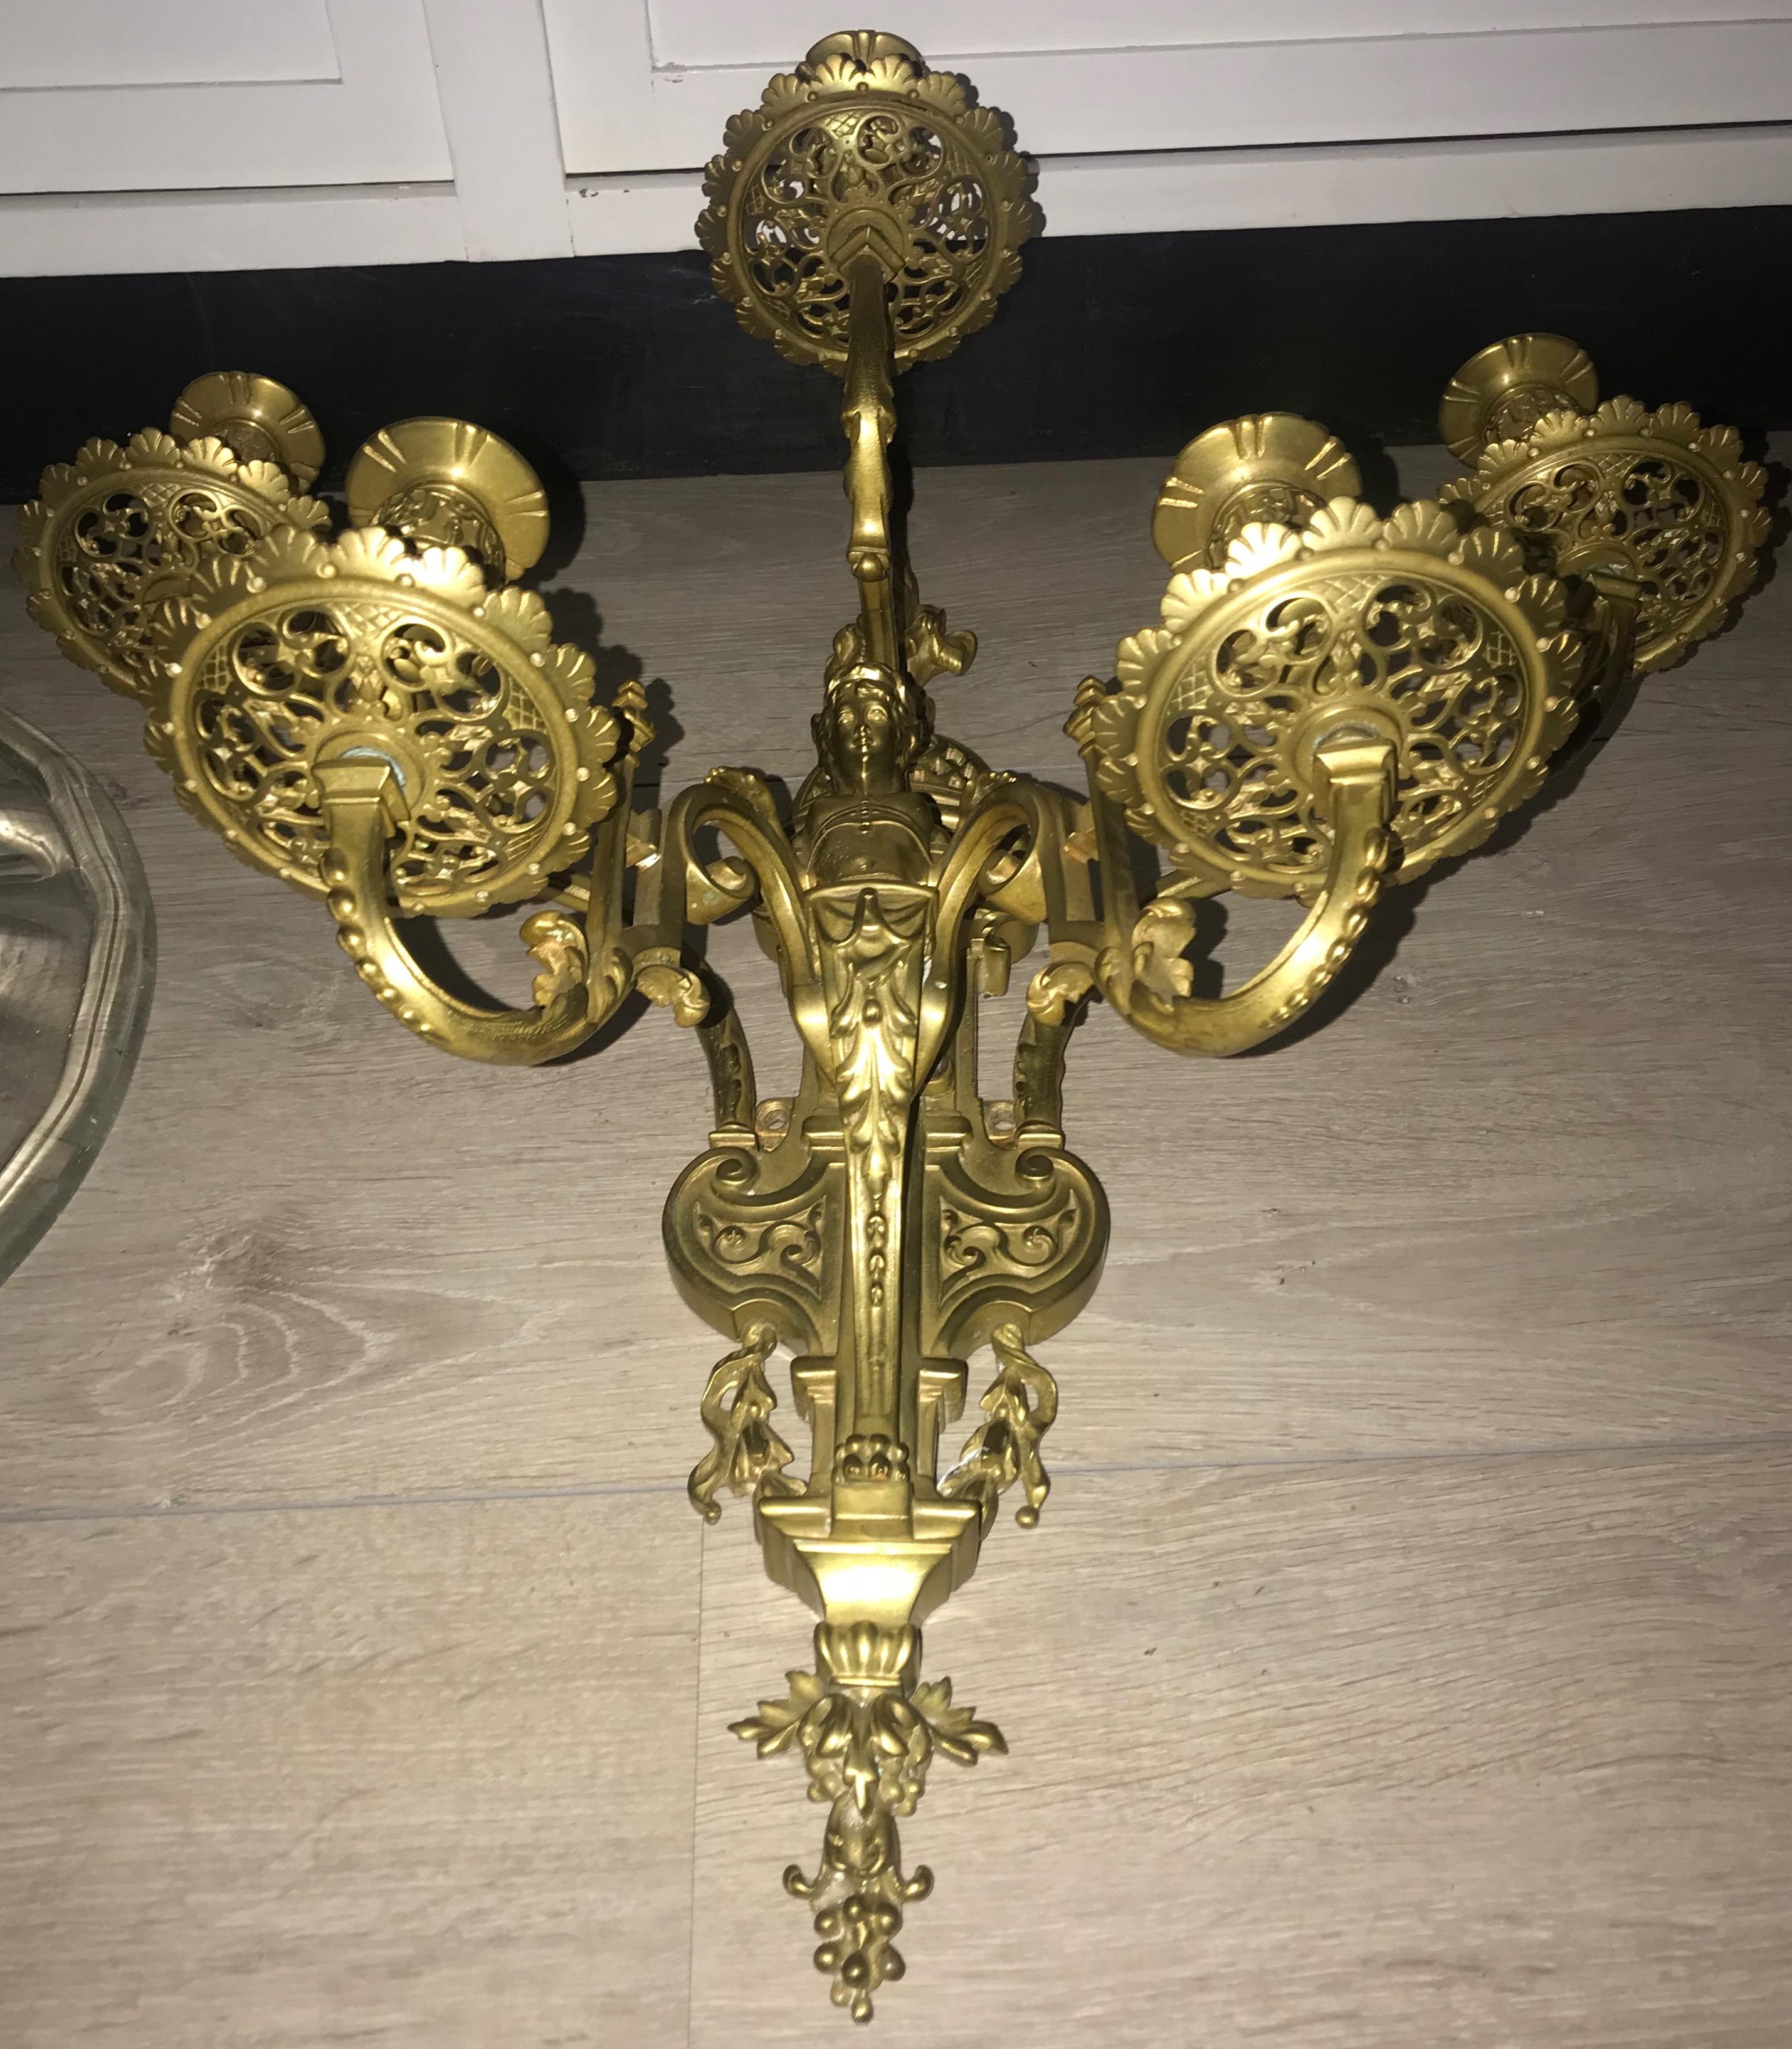 Stunning & Large Antique Bronze Wall Lamp / Candle Sconce with Goddess Sculpture For Sale 3